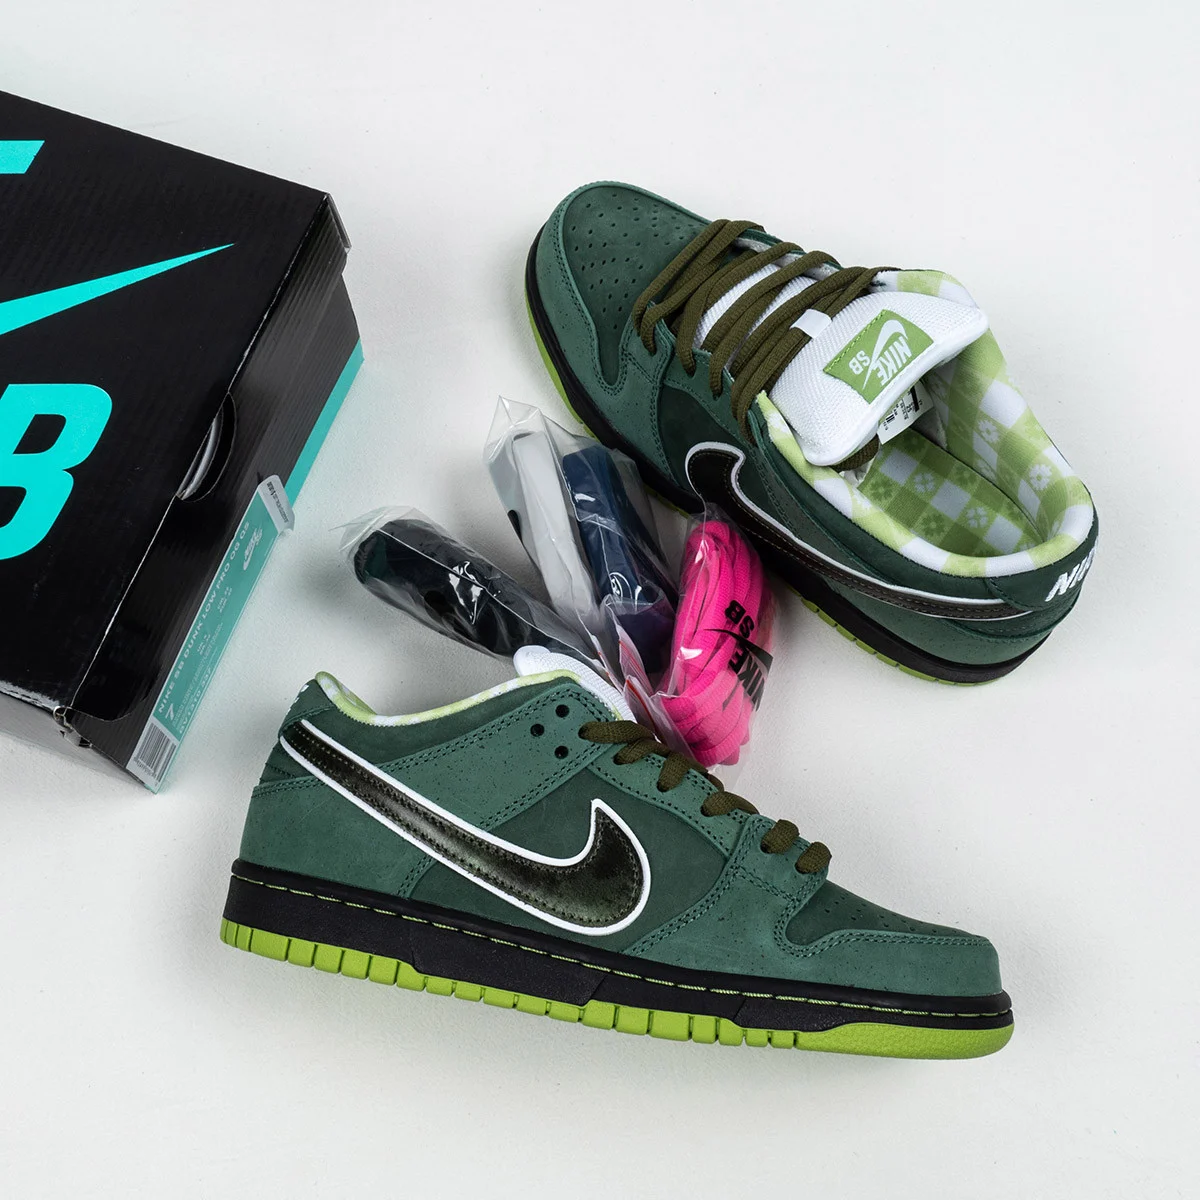 Concepts x Nike SB Dunk Low Green Lobster BV1310-337 For Sale